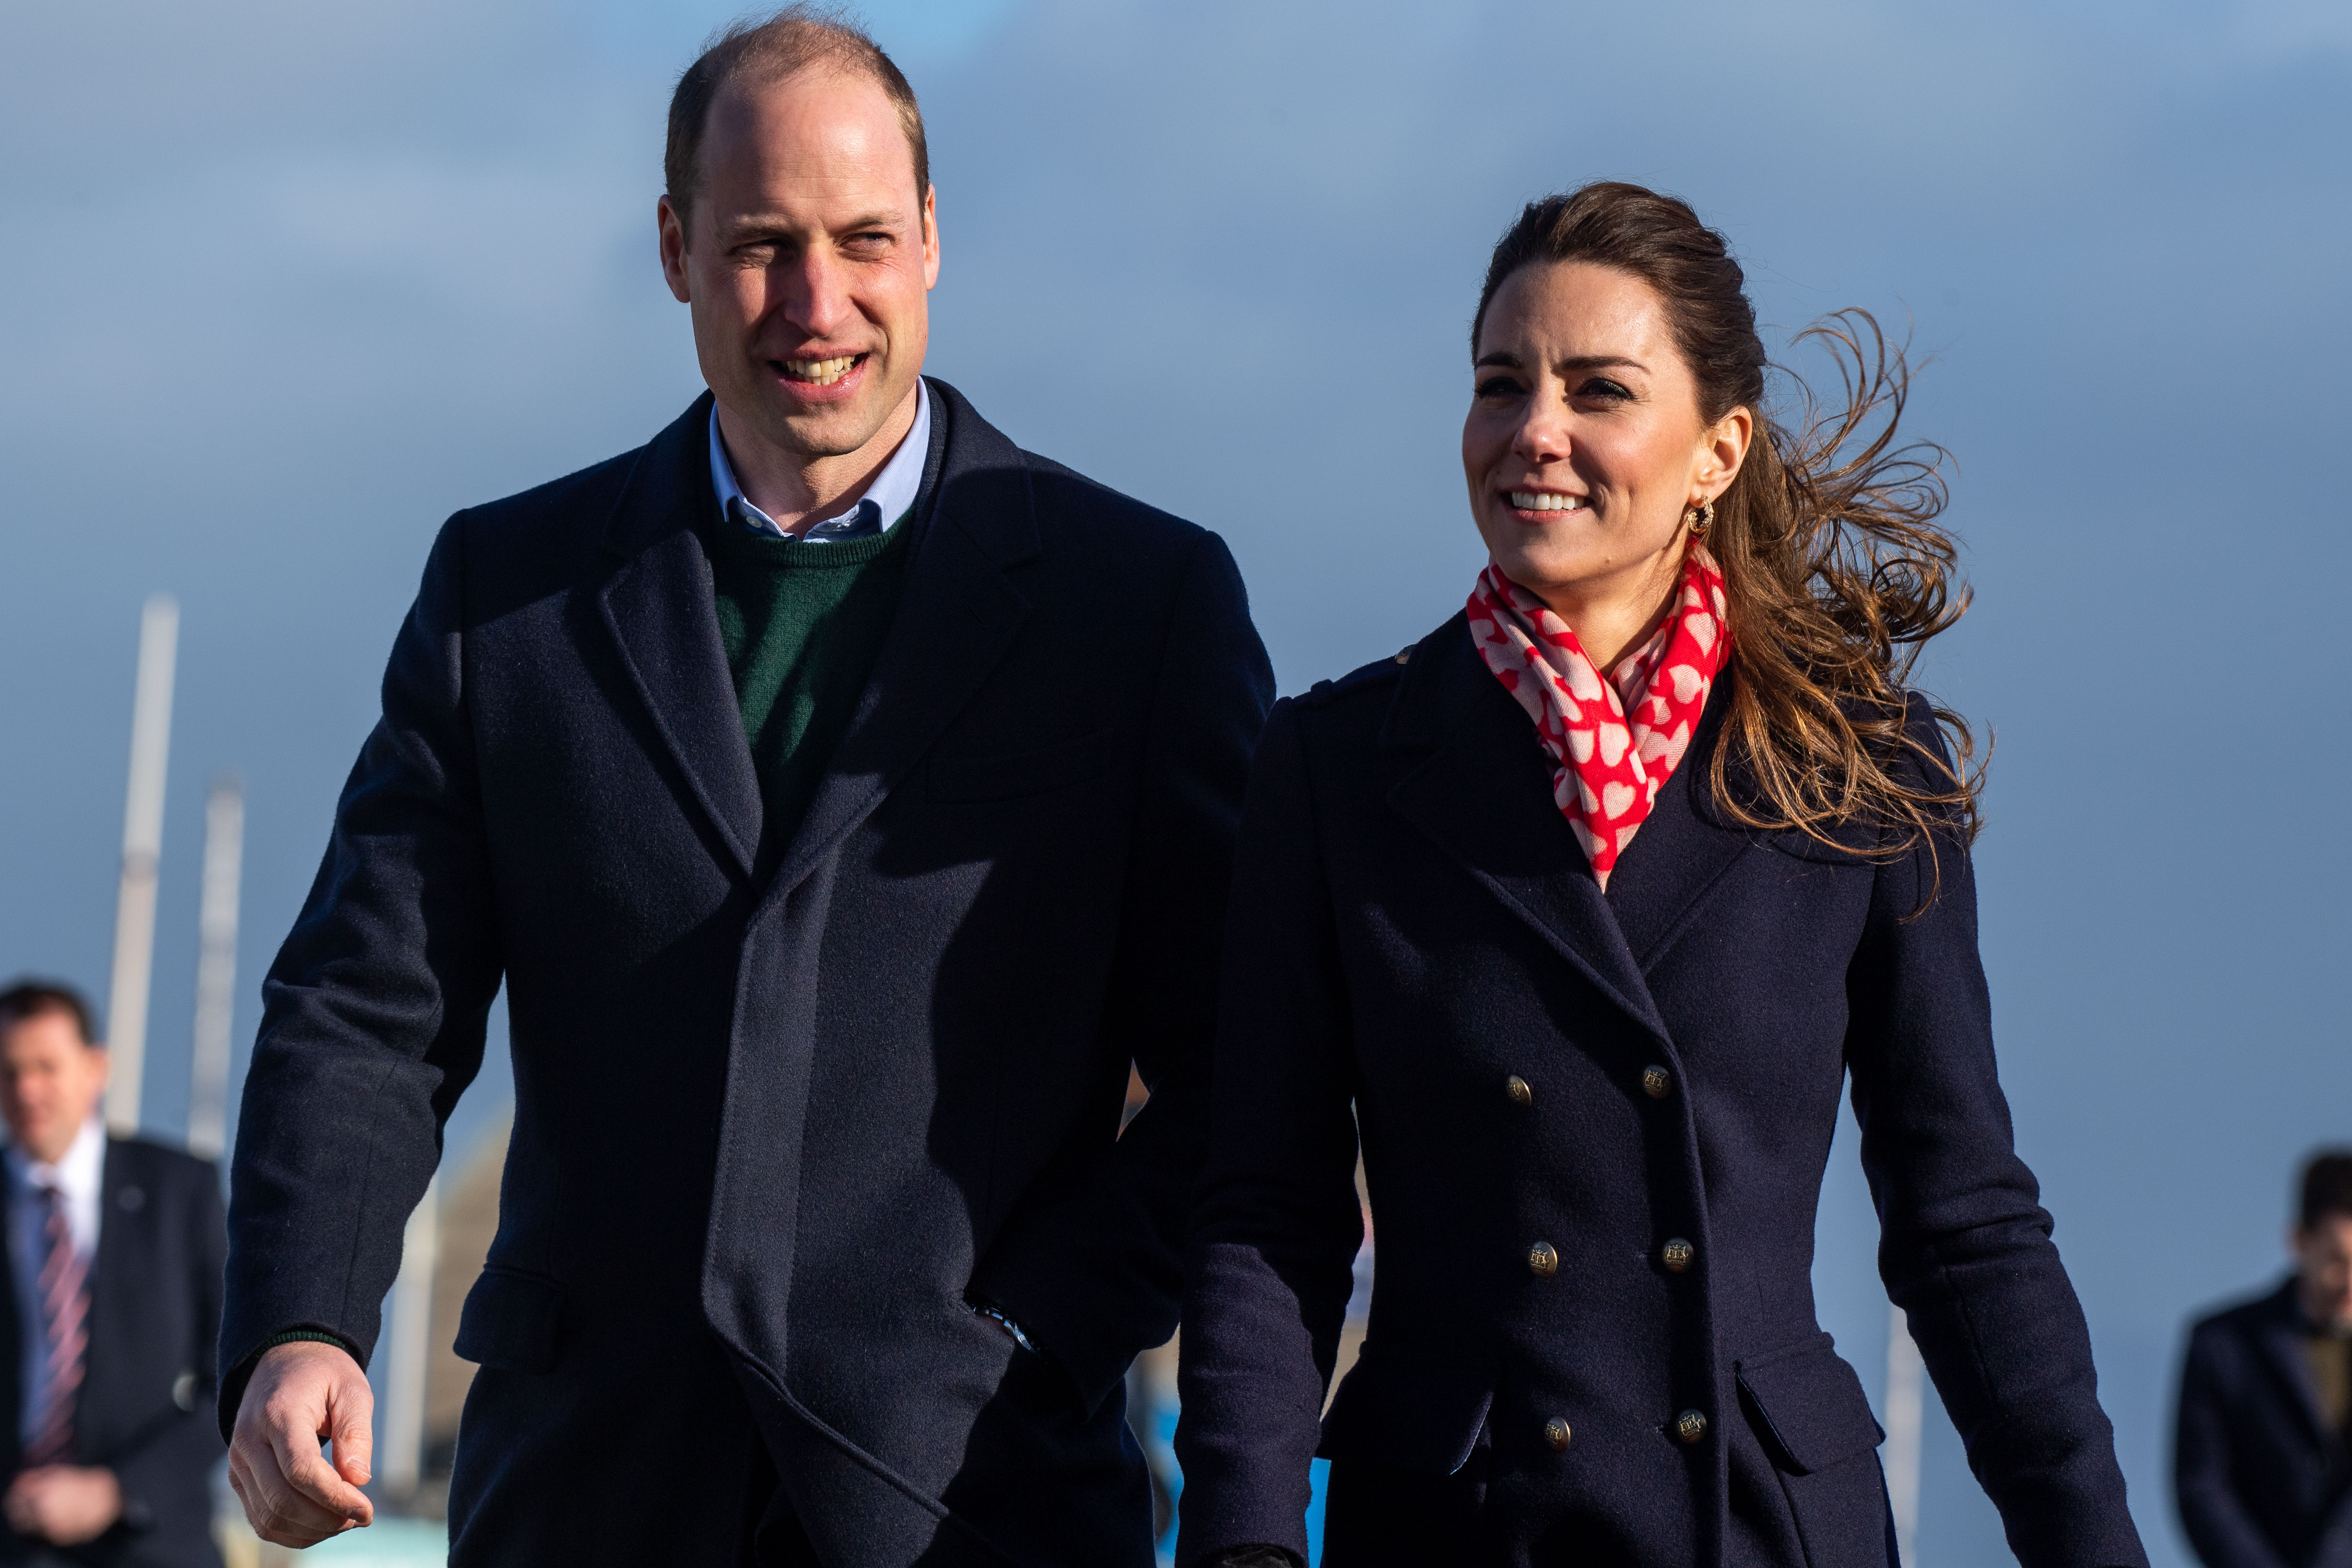 Prince William and Kate Middleton walk together.